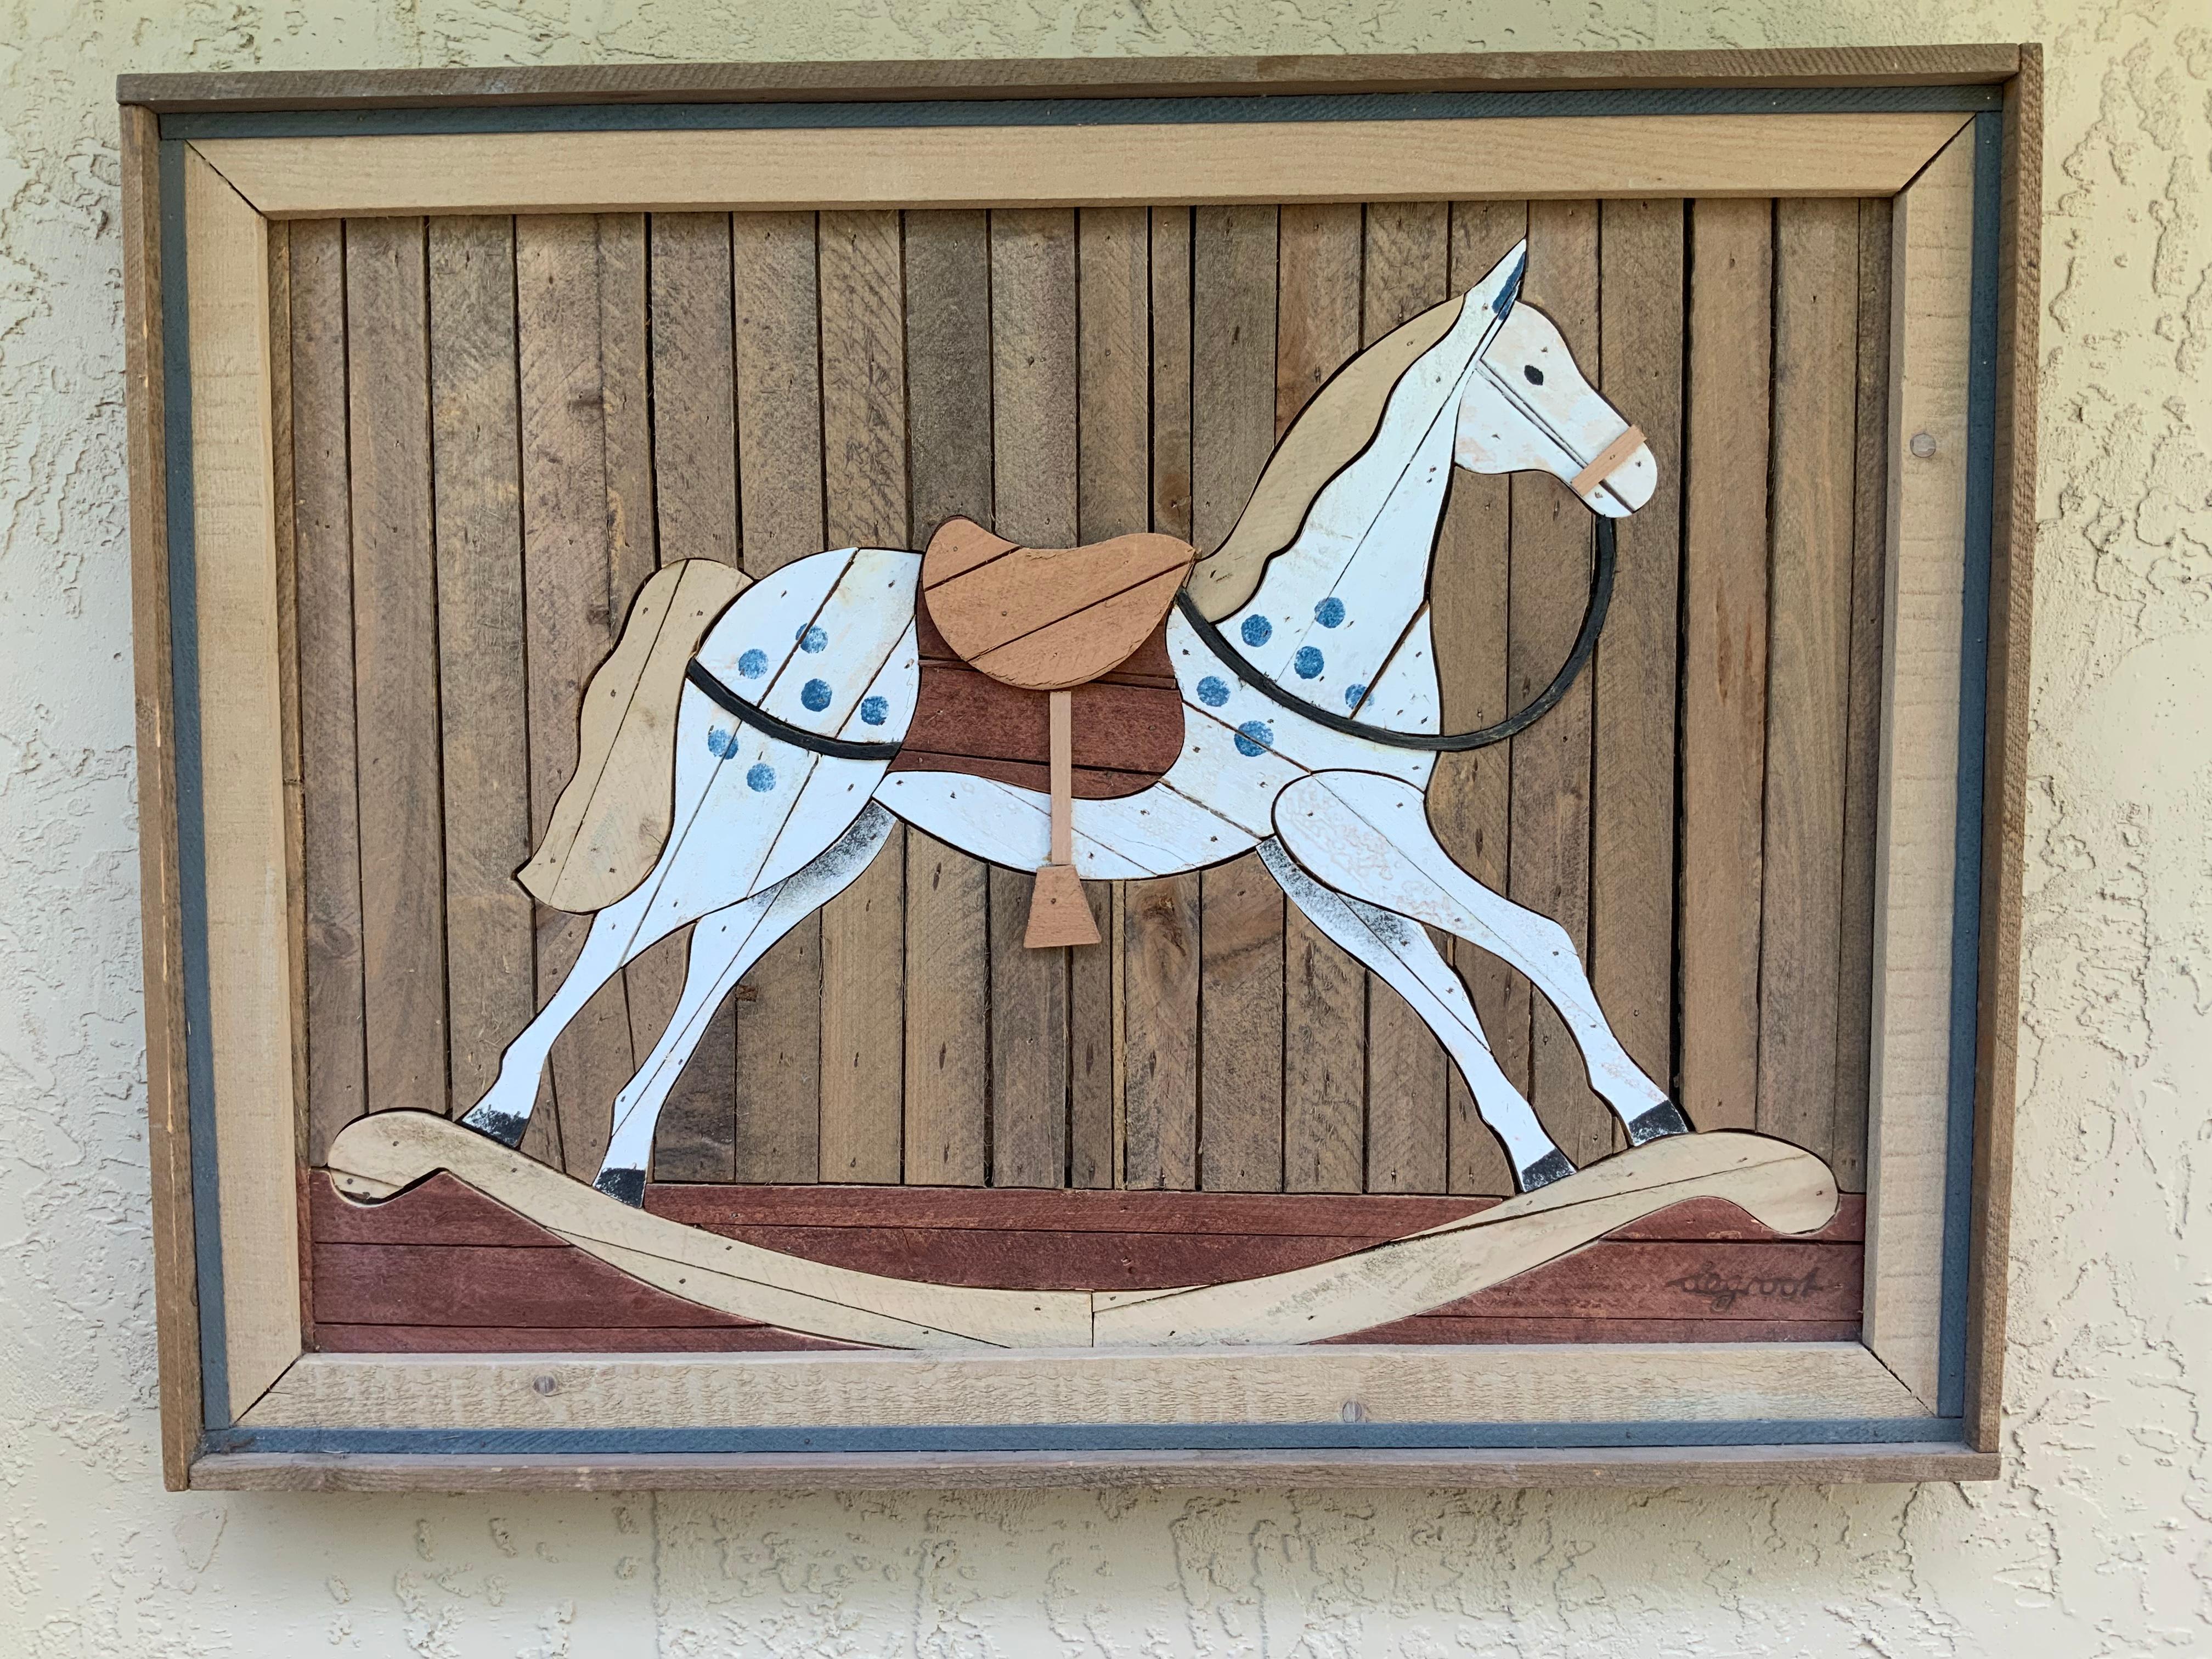 Beautiful wall hanging made of carved wood, hand painted mosaic pieces of wood depicting
A children’s rocking horse, rustic, countryside.
Artist signature bottom right.